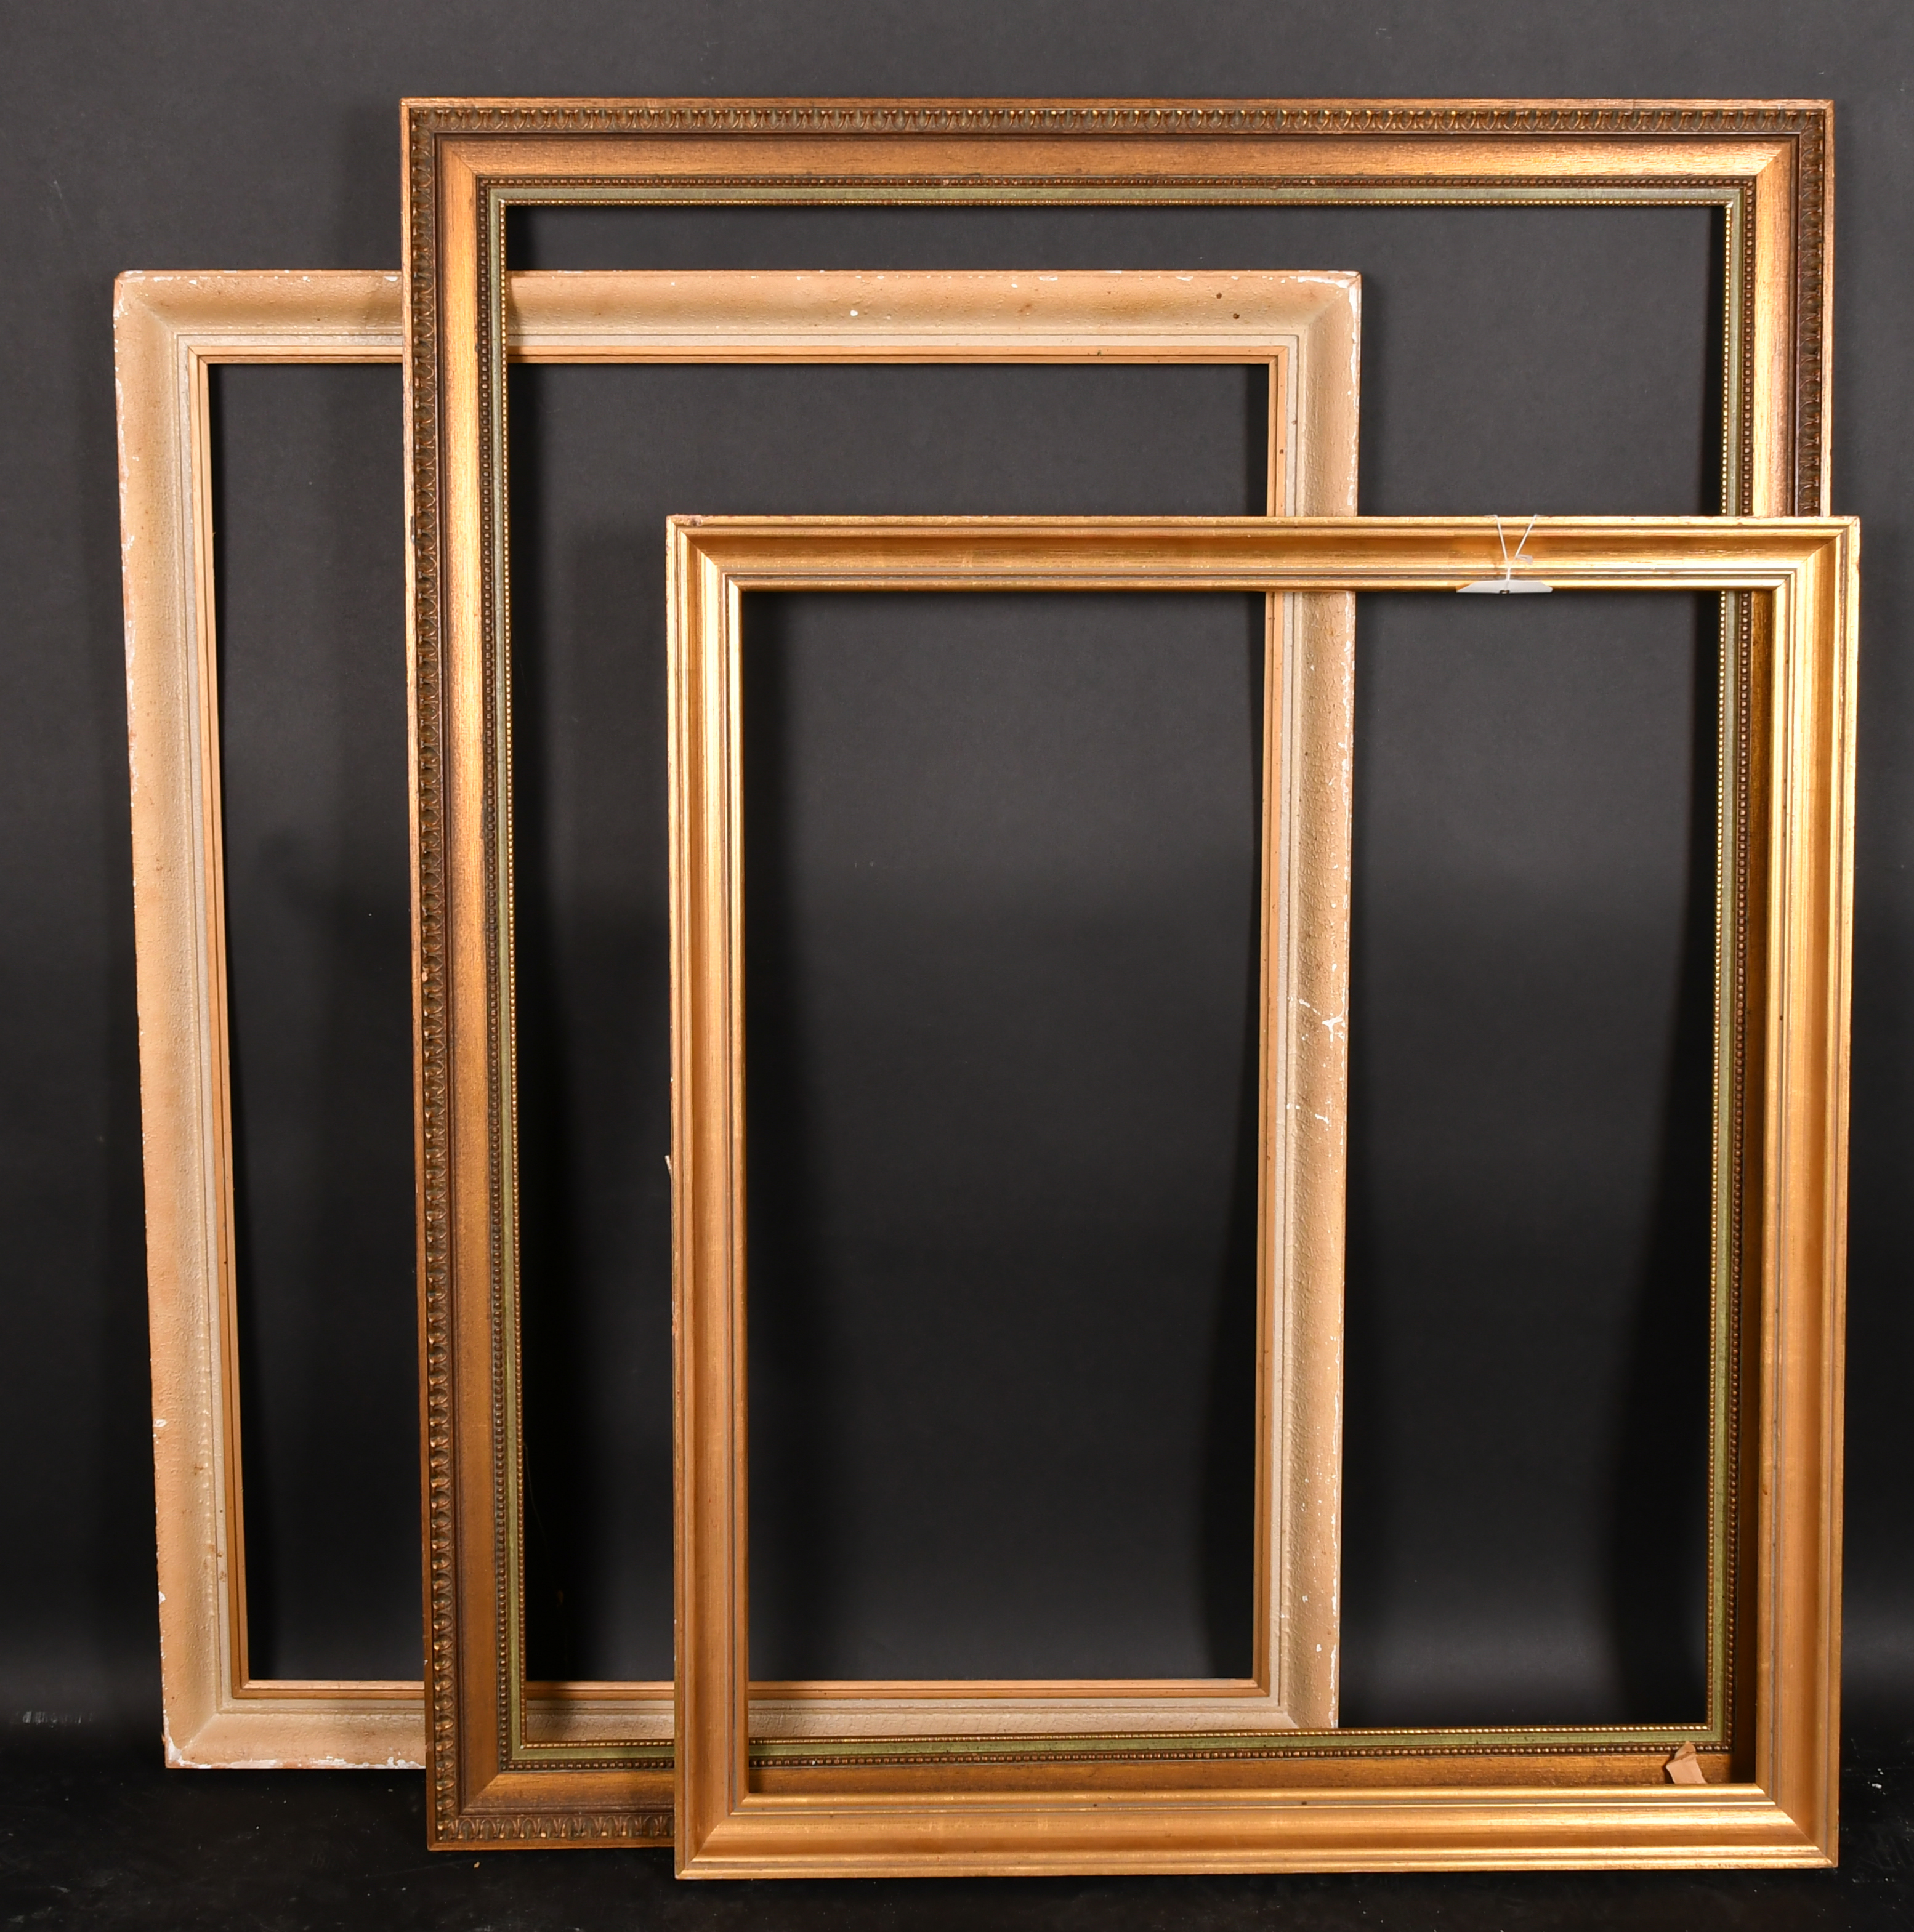 Early 20th Century English School. A Painted Composition Frame, rebate 36" x 28" (91.5 x 71.1cm) and - Image 2 of 3